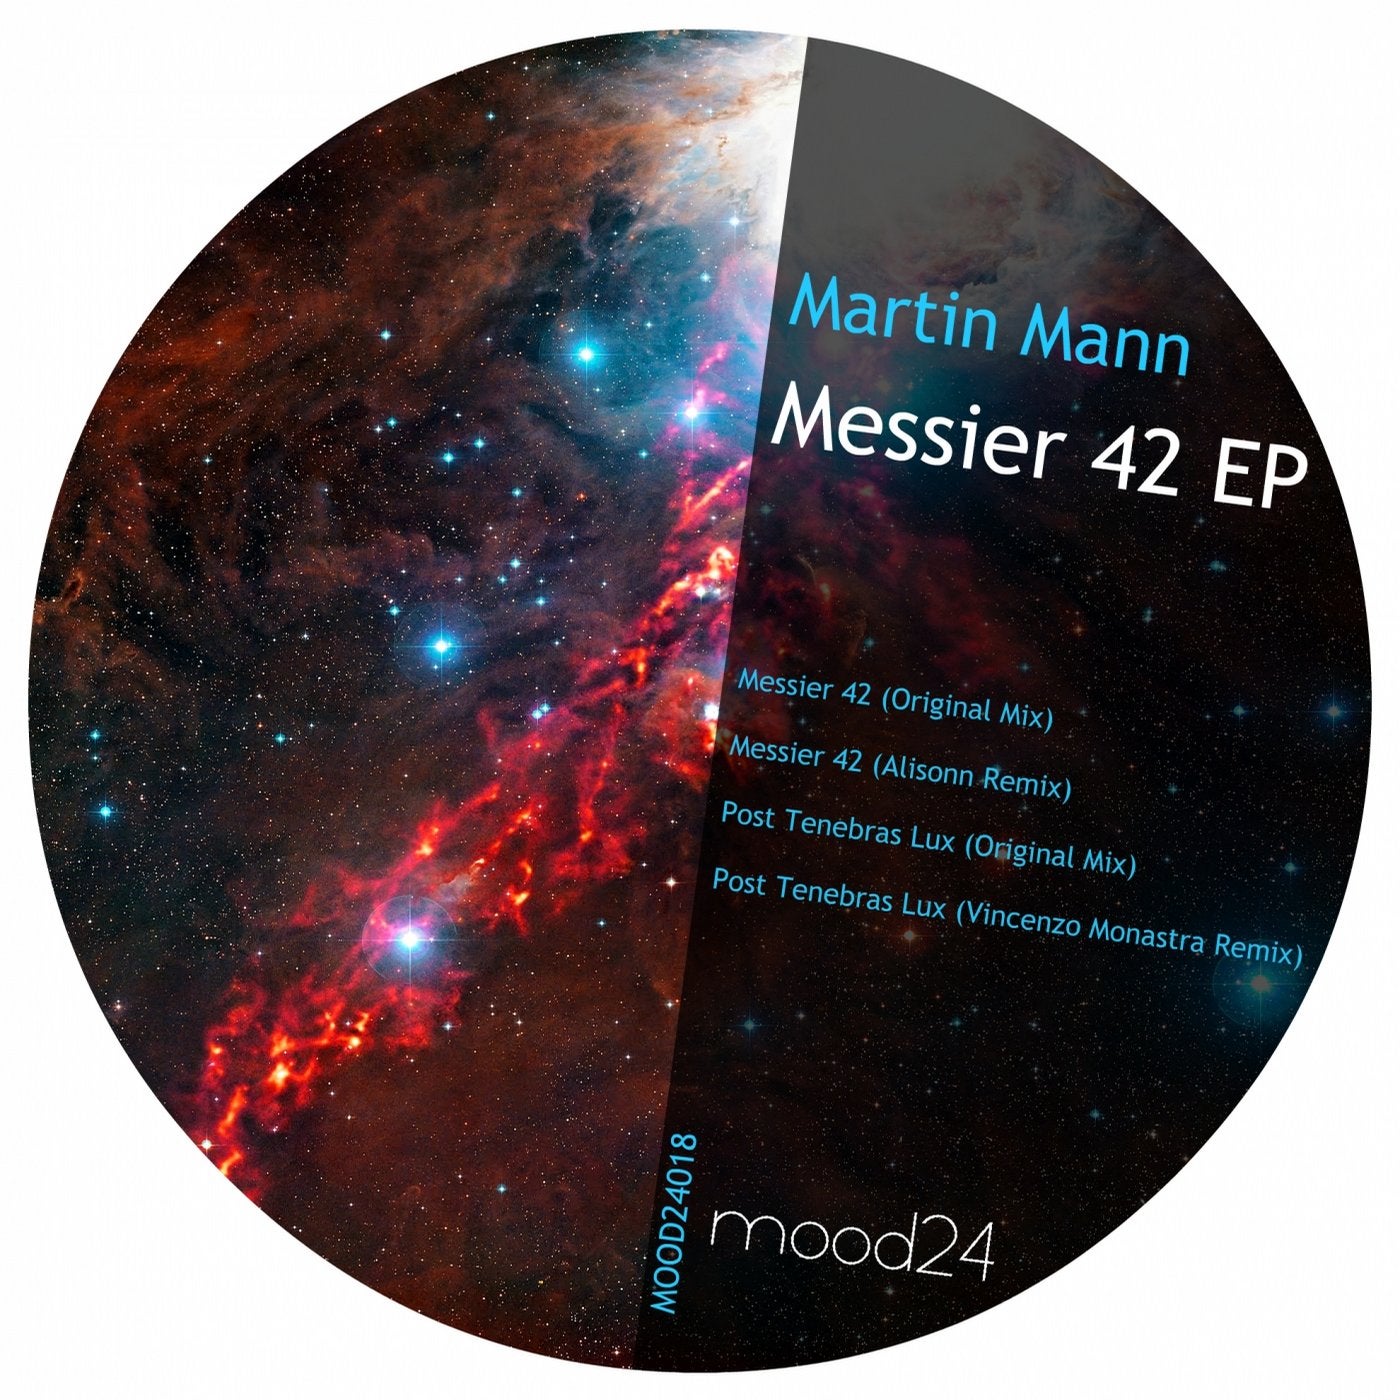 Messier 42 EP